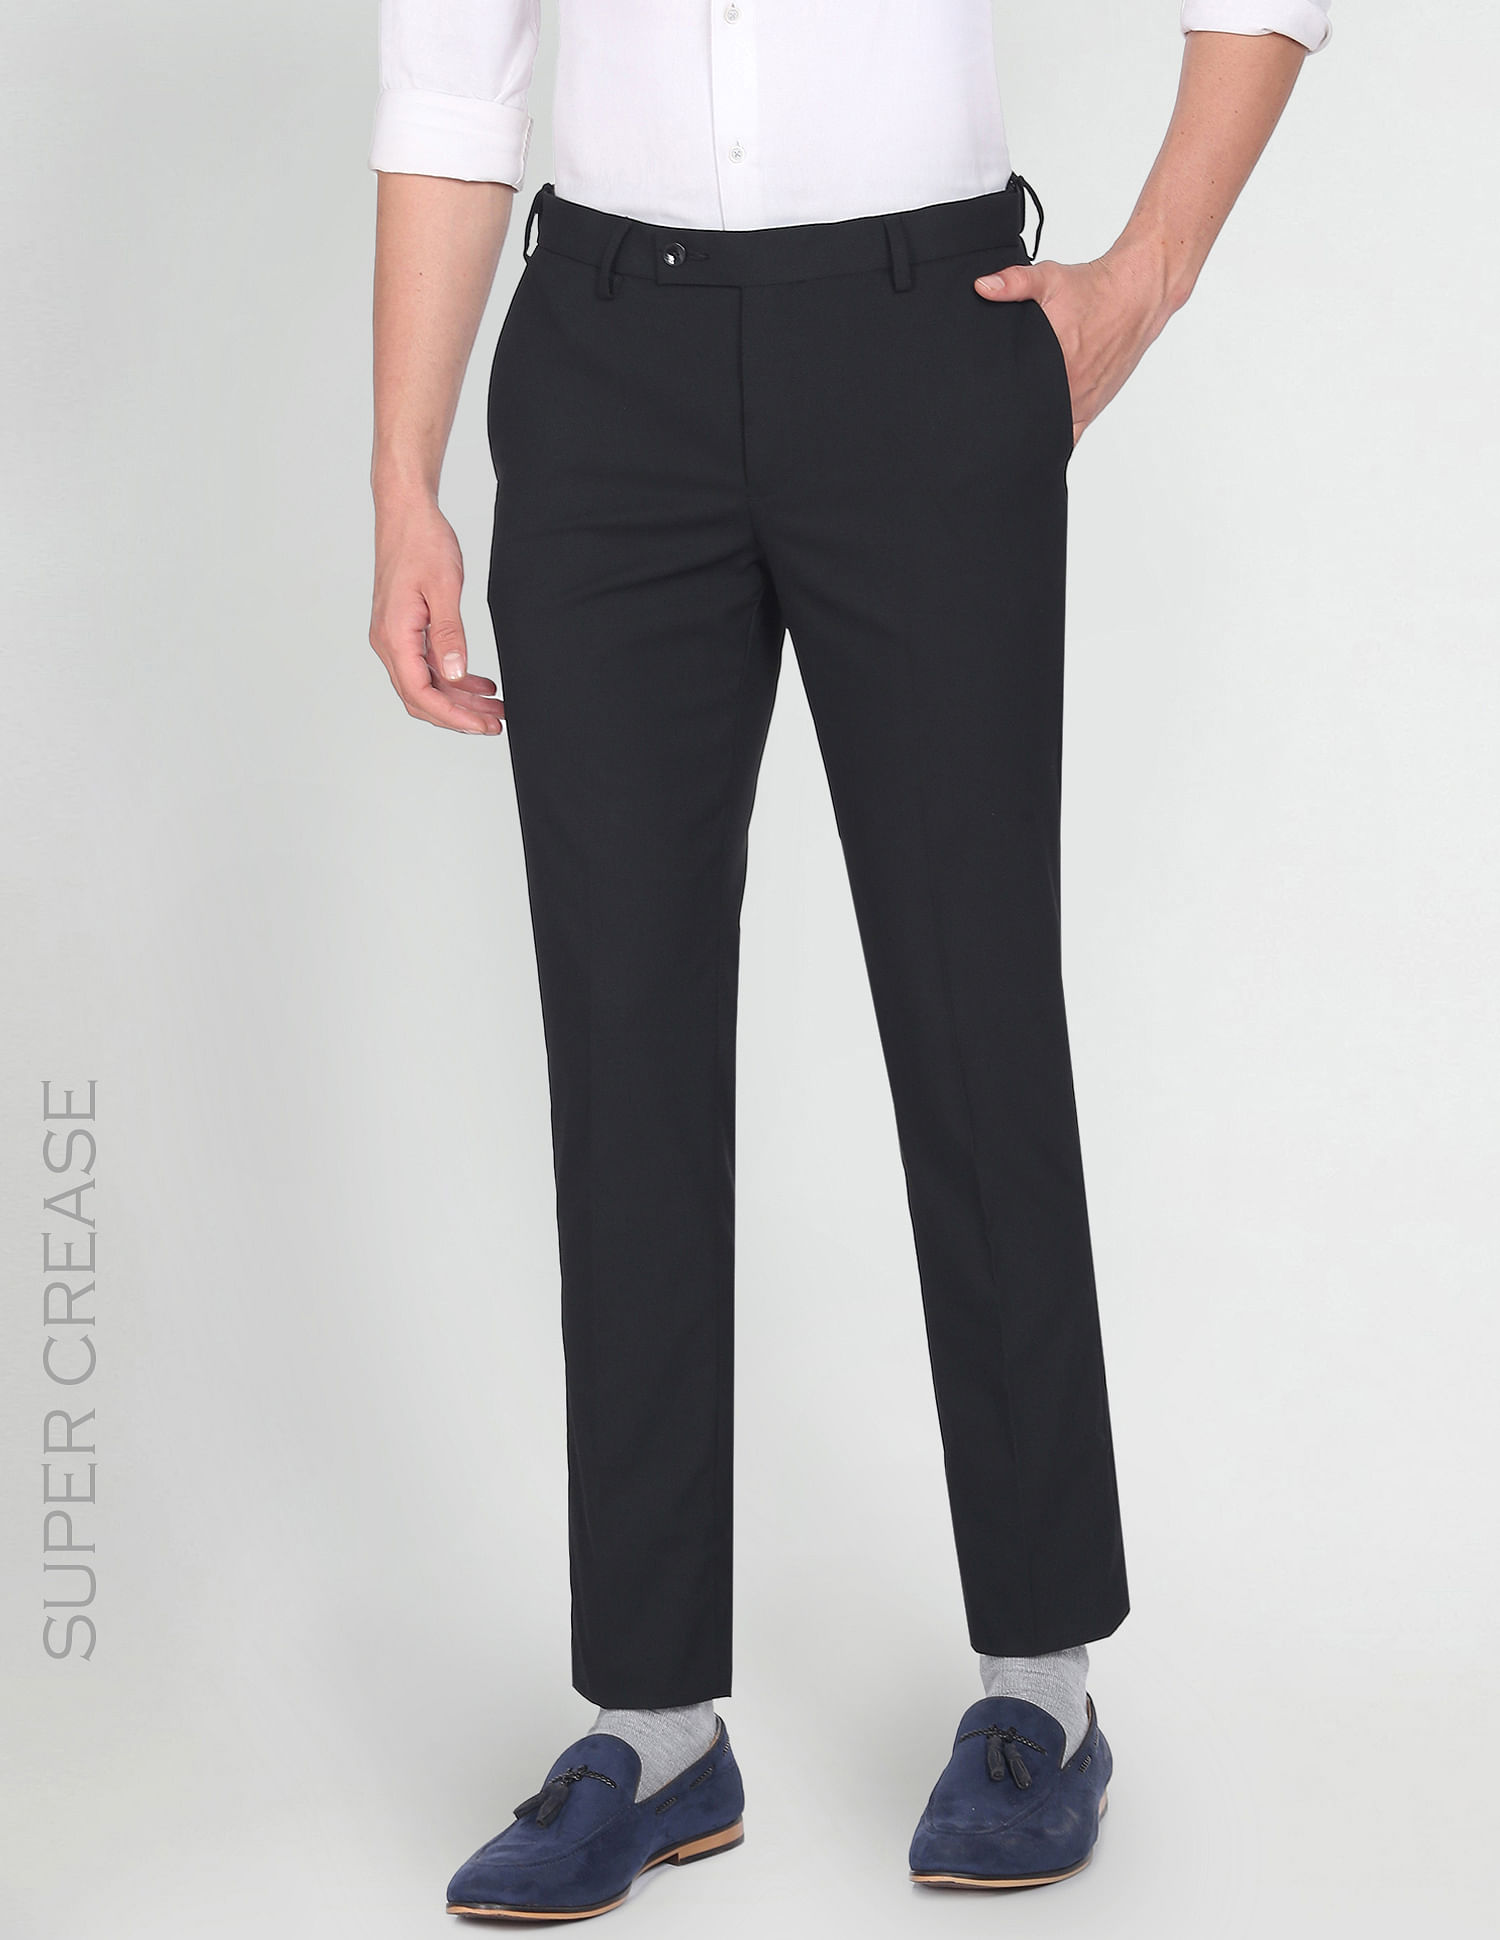 Buy Arrow Navy Slim Fit Trousers from top Brands at Best Prices Online in  India | Tata CLiQ